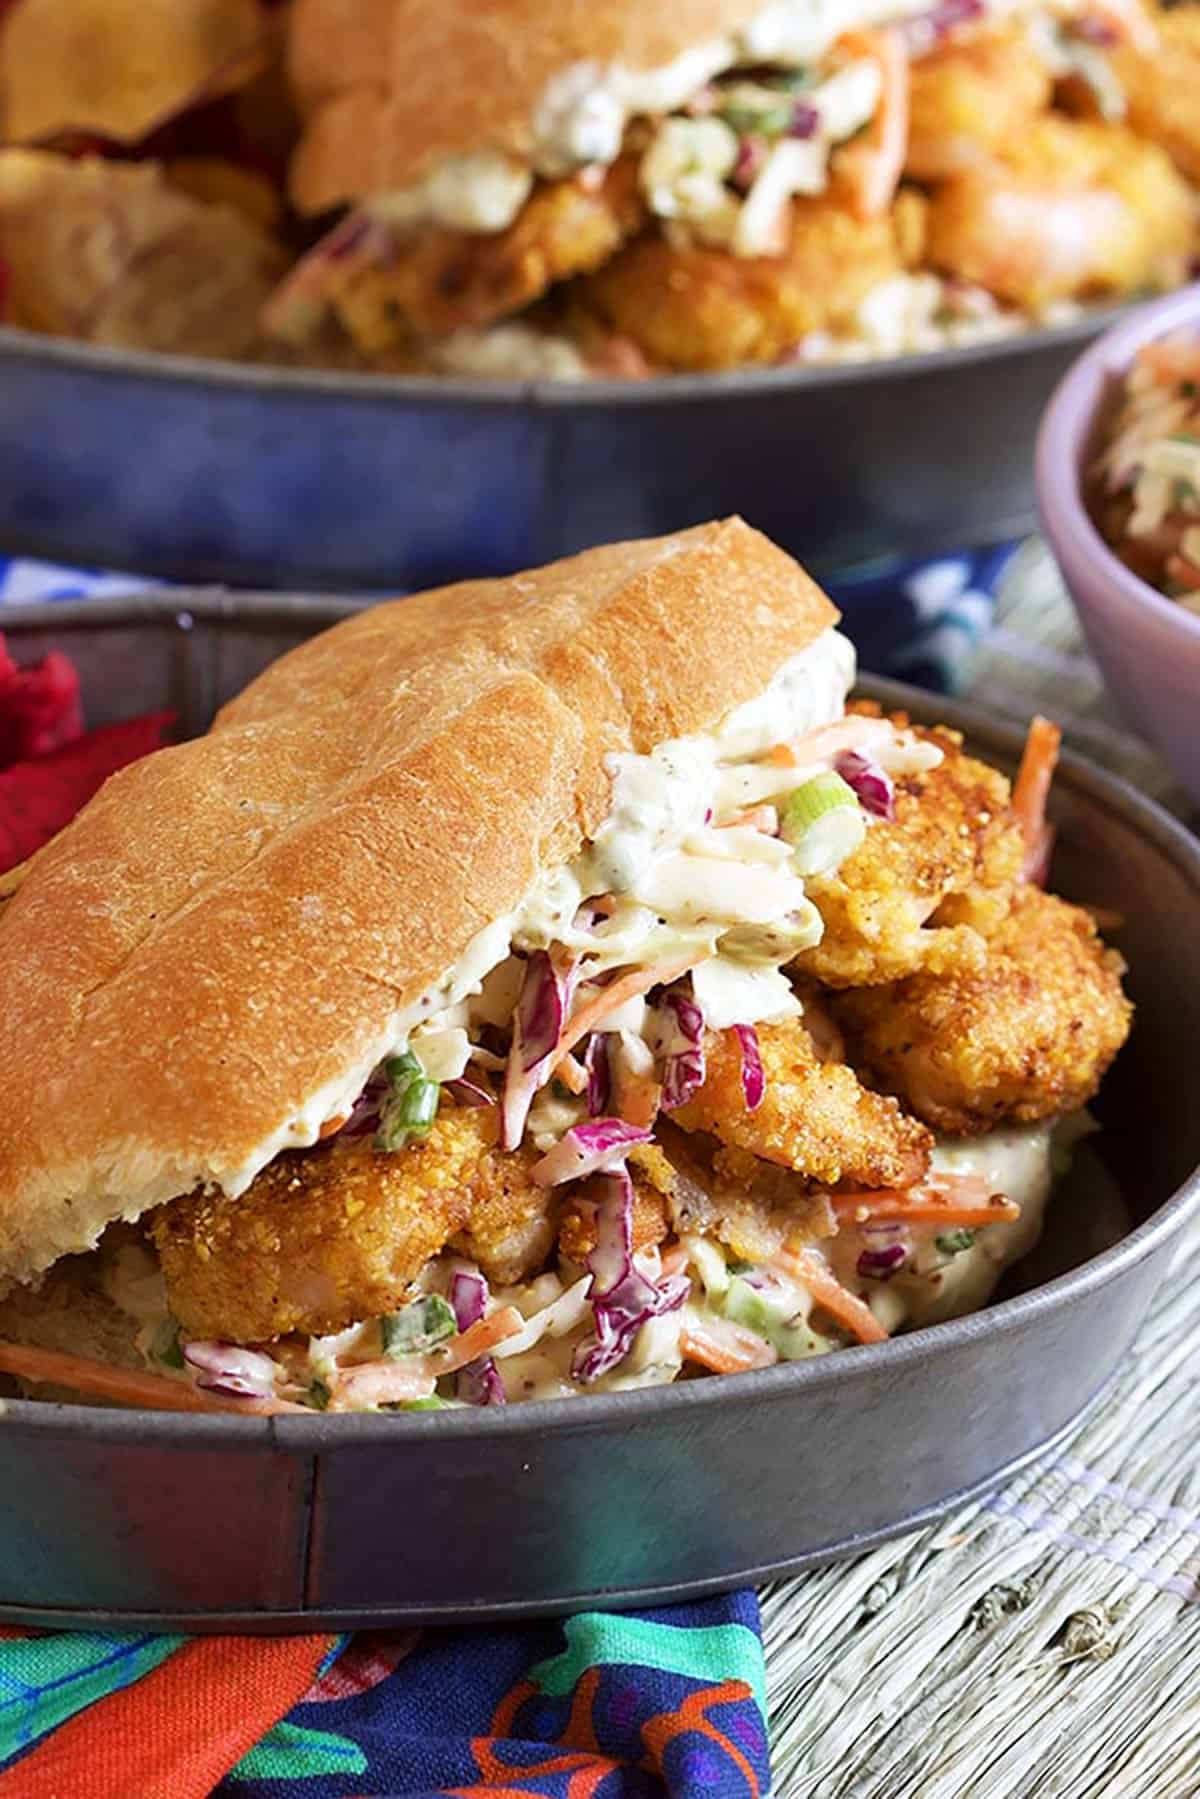 Fried Shrimp Po boy with slaw and sauce plated in a steel tray.